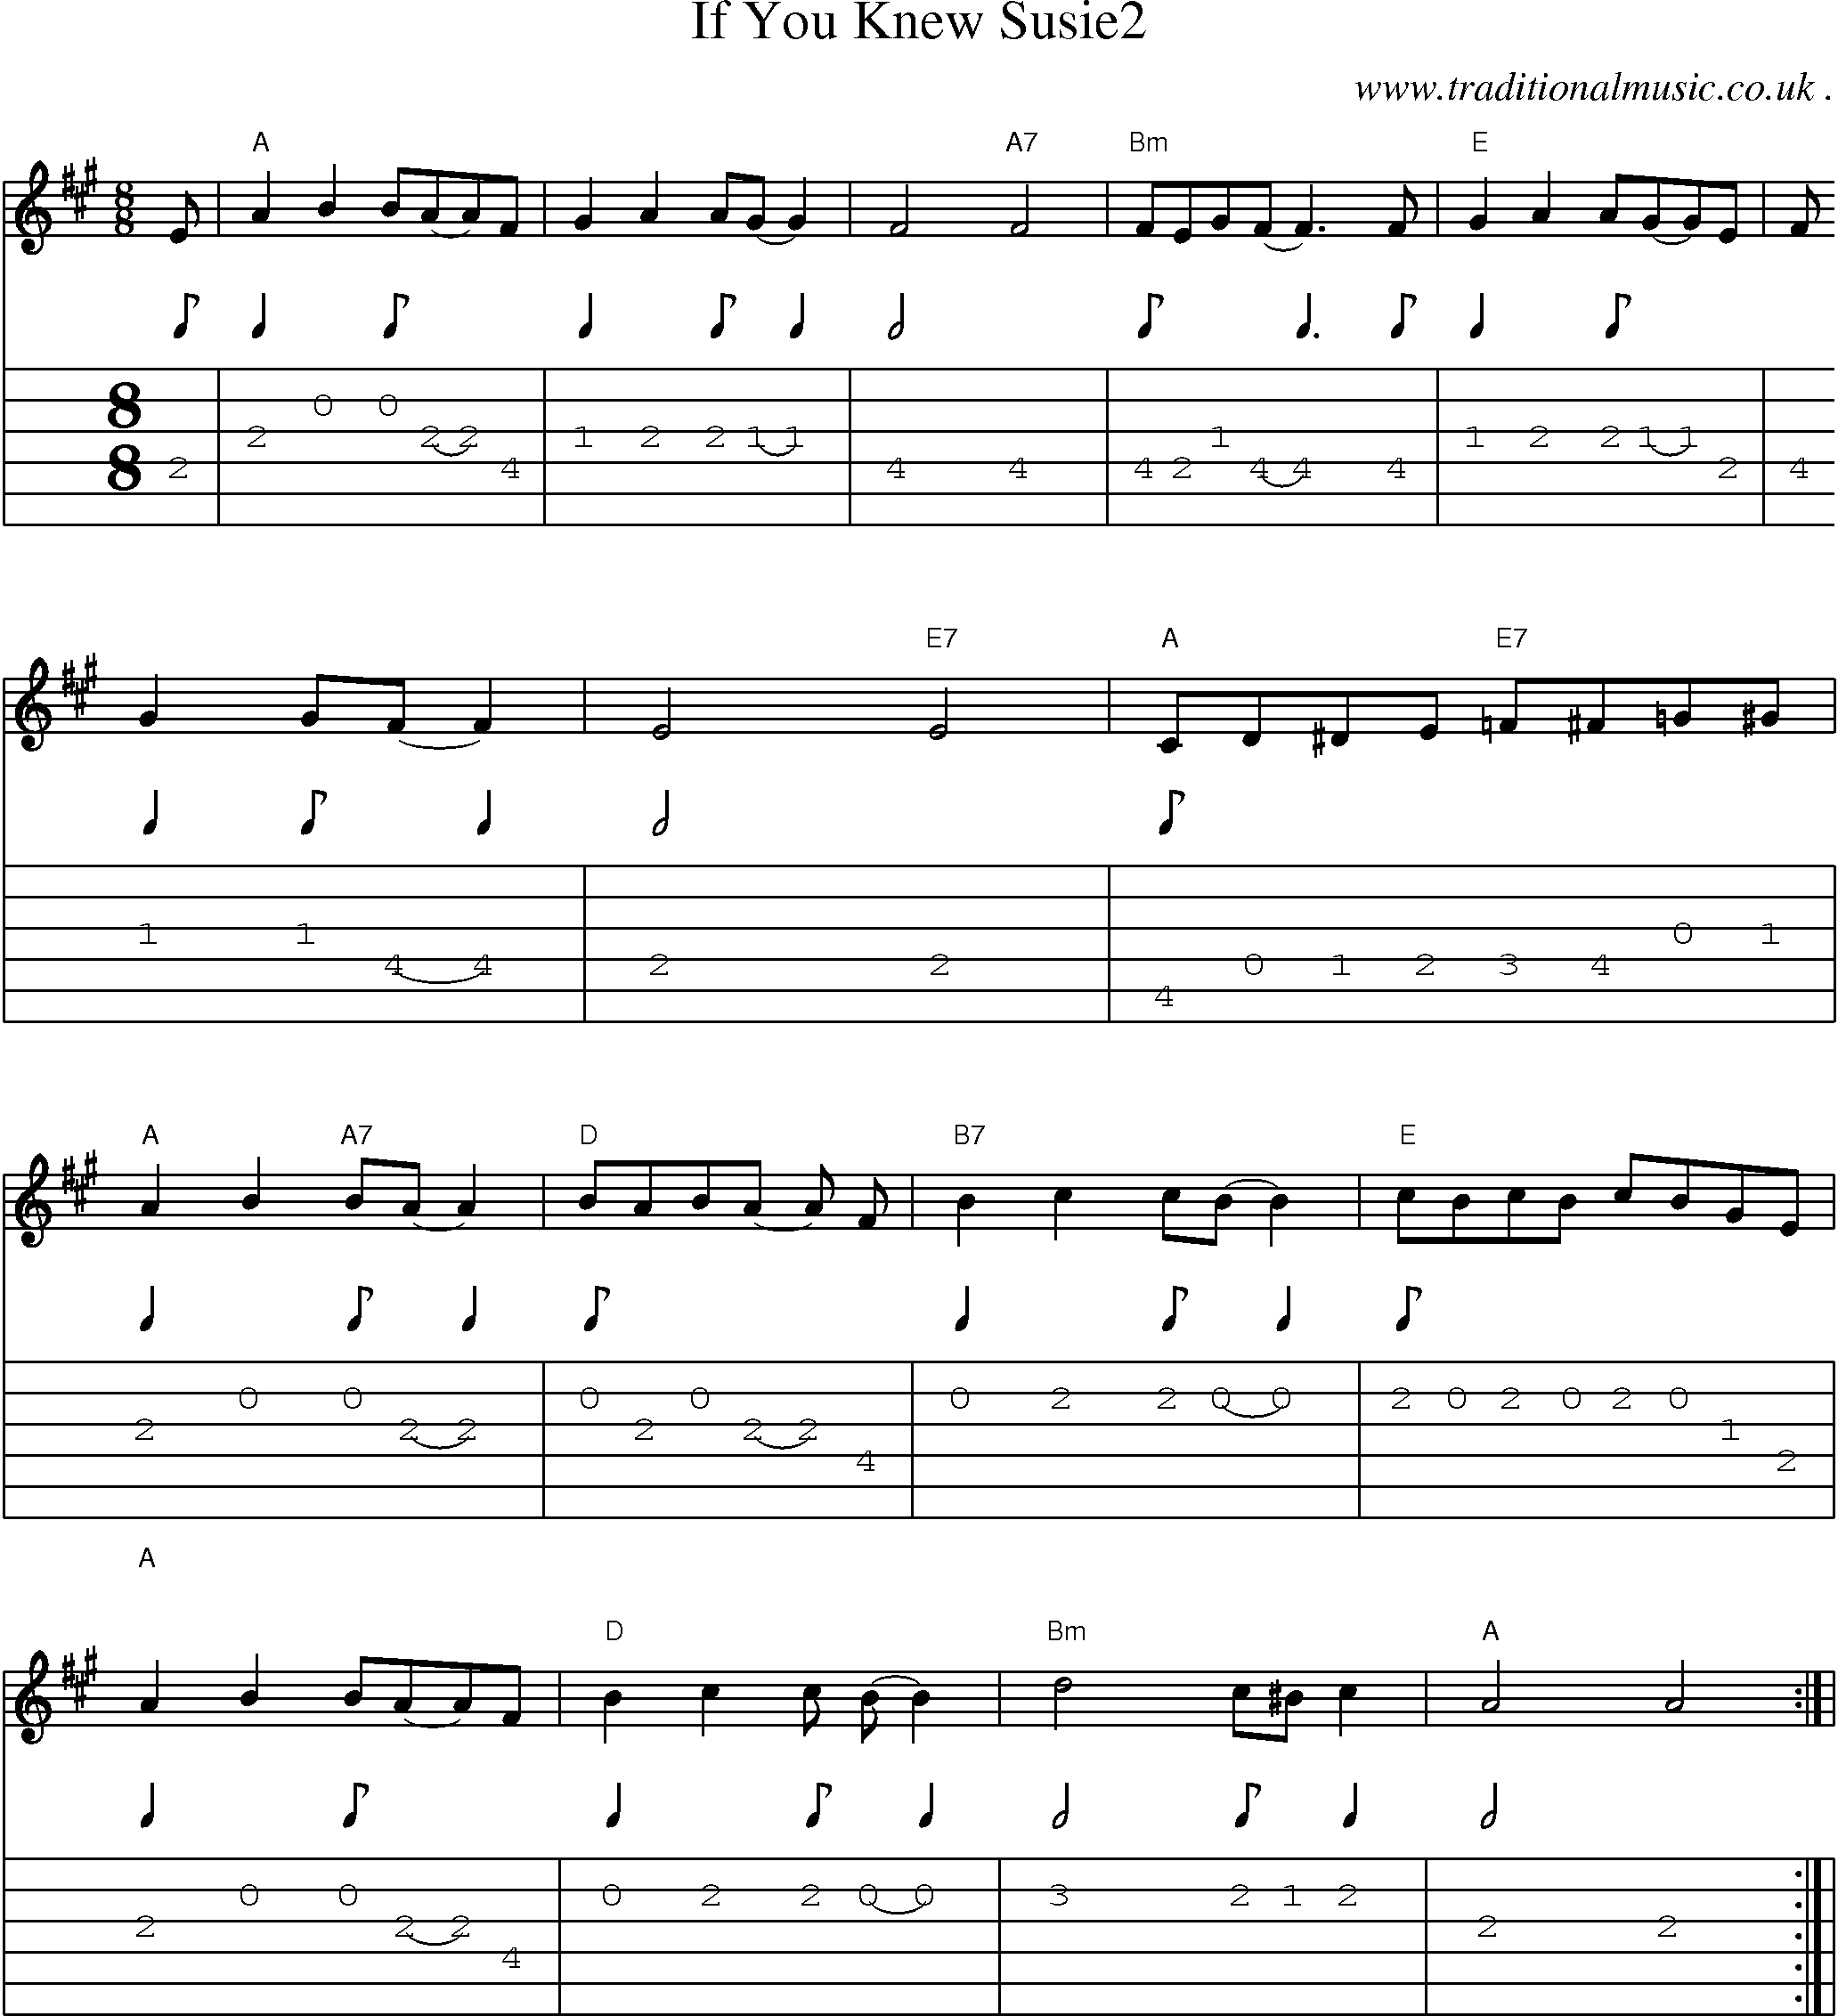 Music Score and Guitar Tabs for If You Knew Susie2